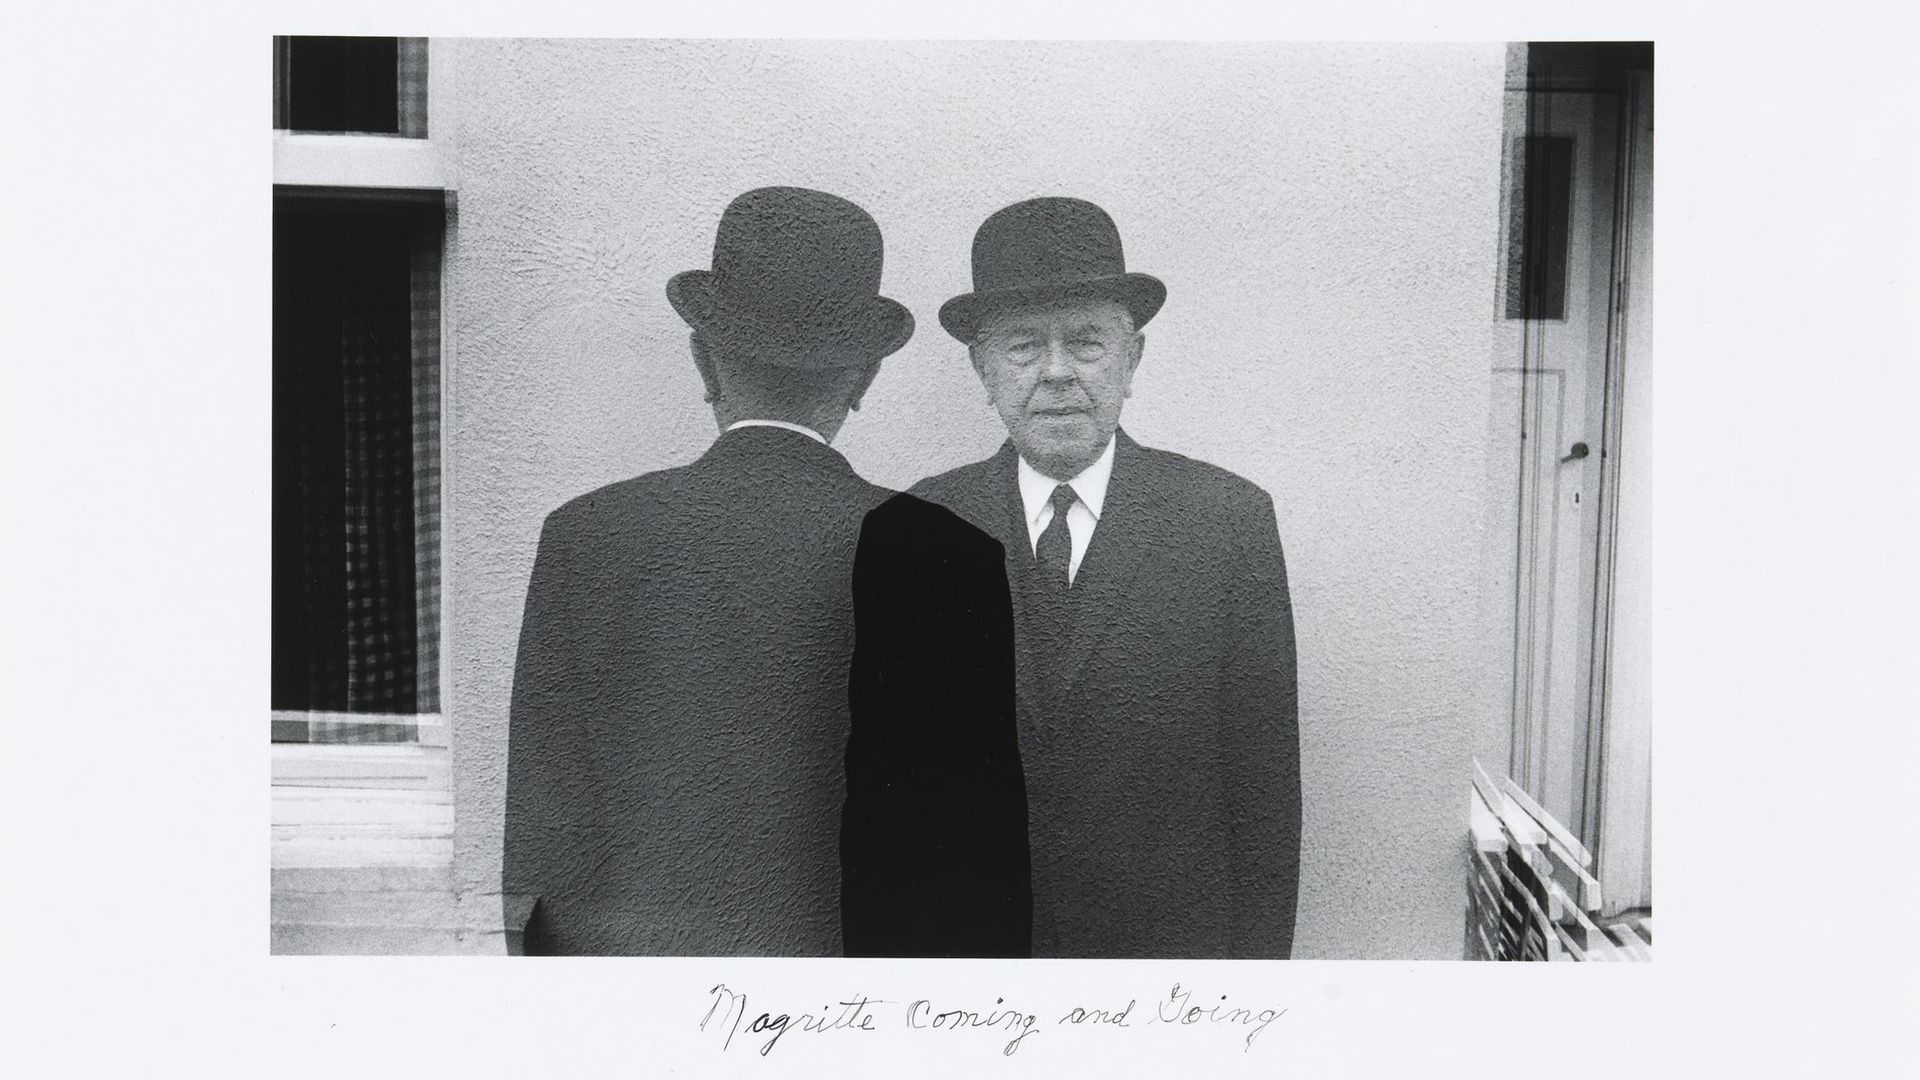 Duane Michals, "Magritte Coming and Going", 1965